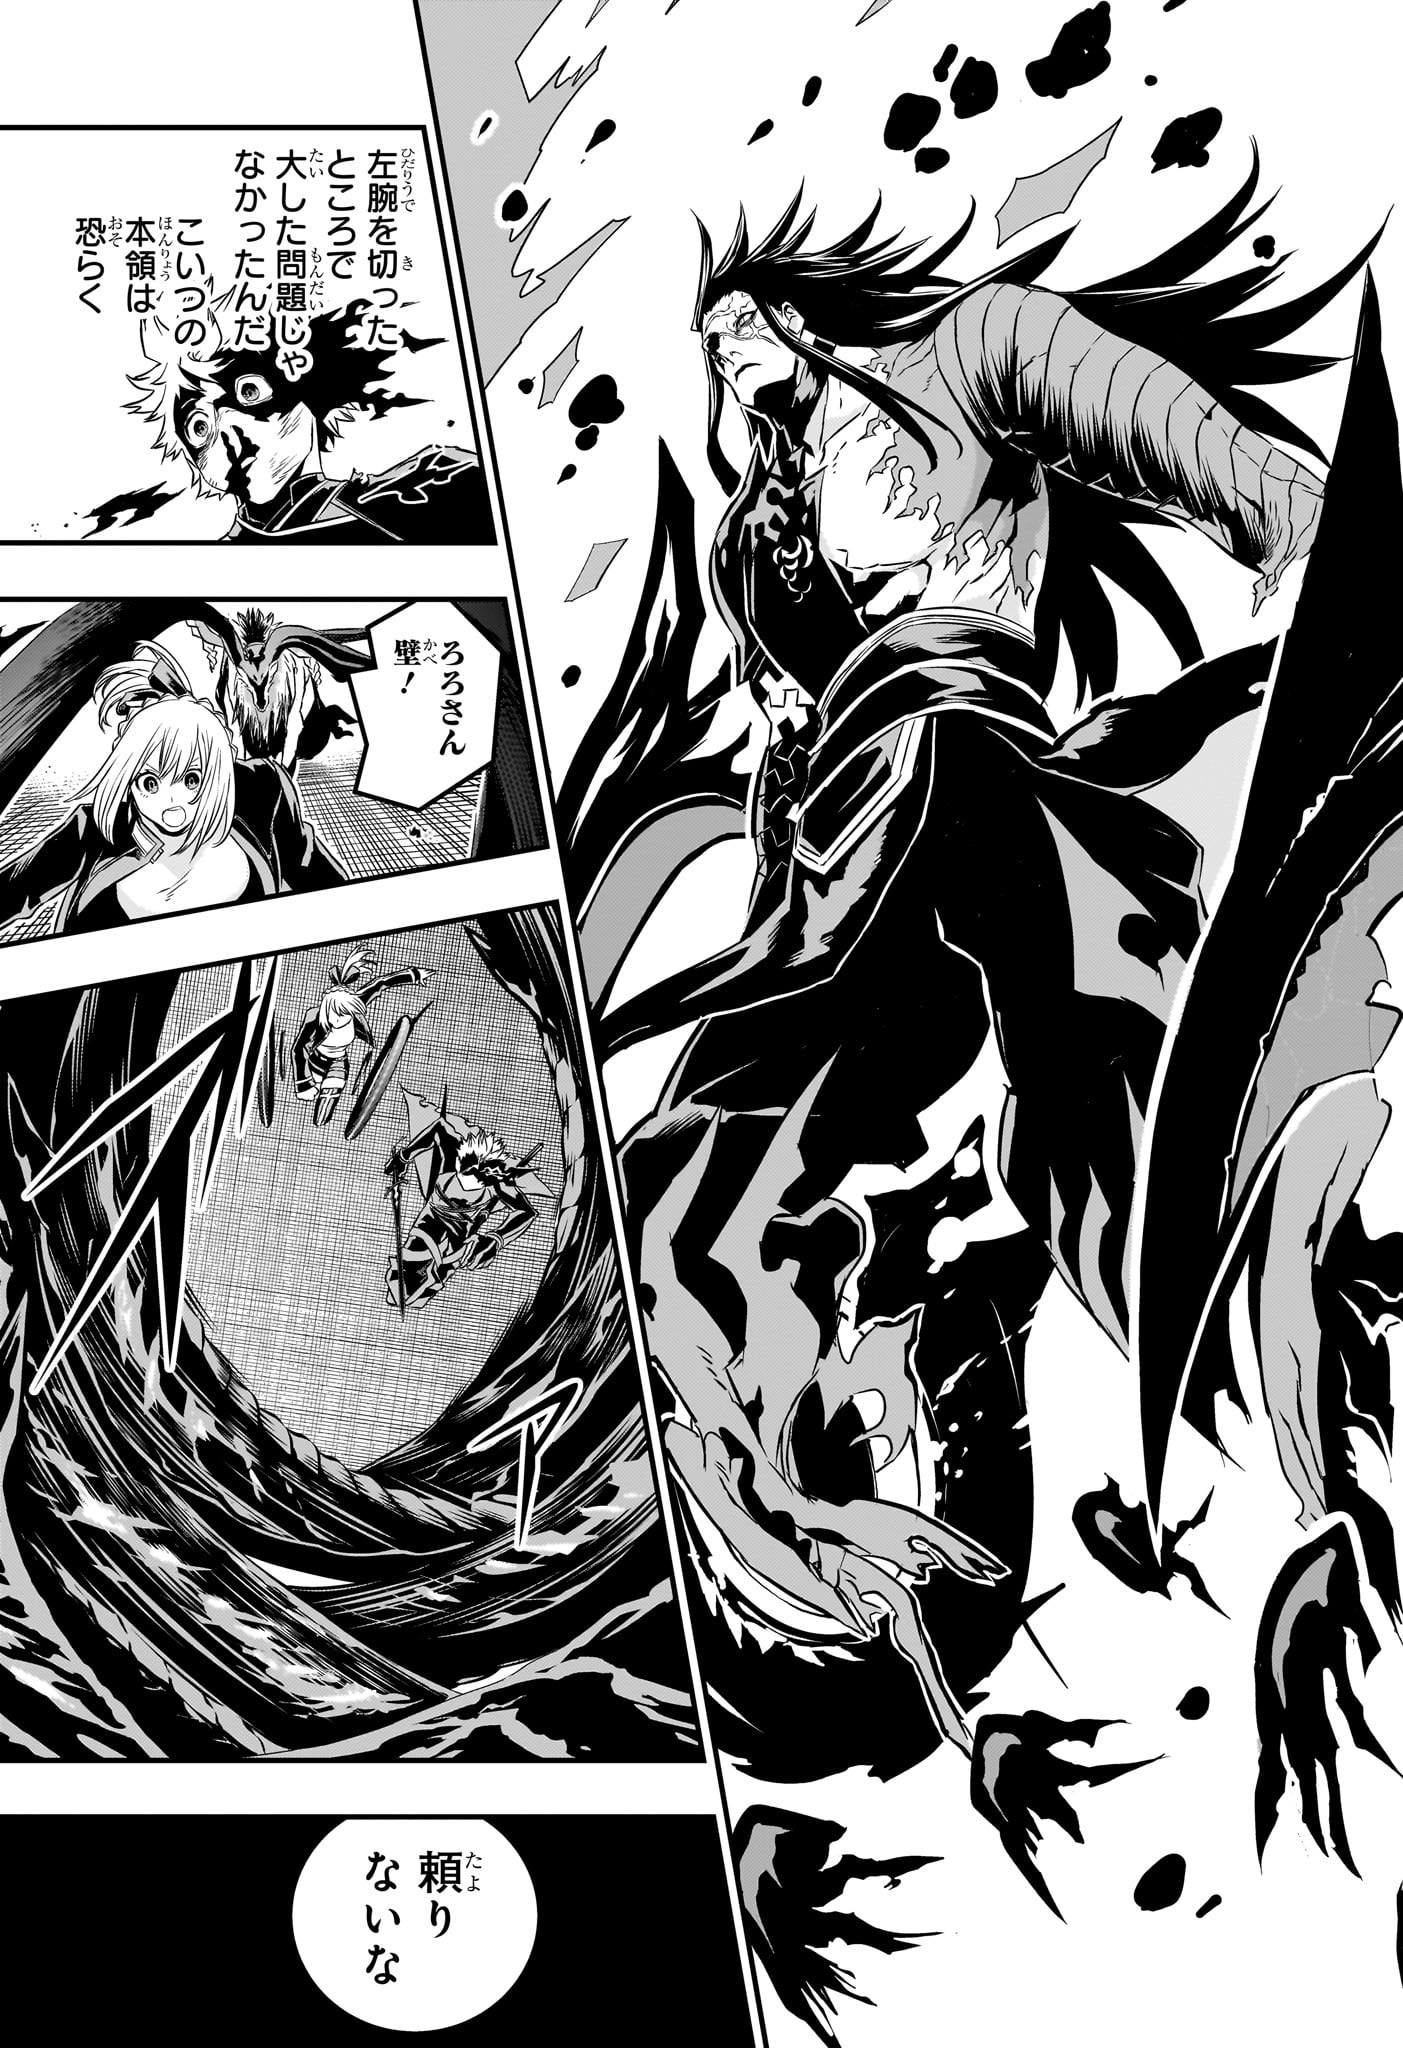 Nue no Onmyouji - Chapter 56 - Page 7